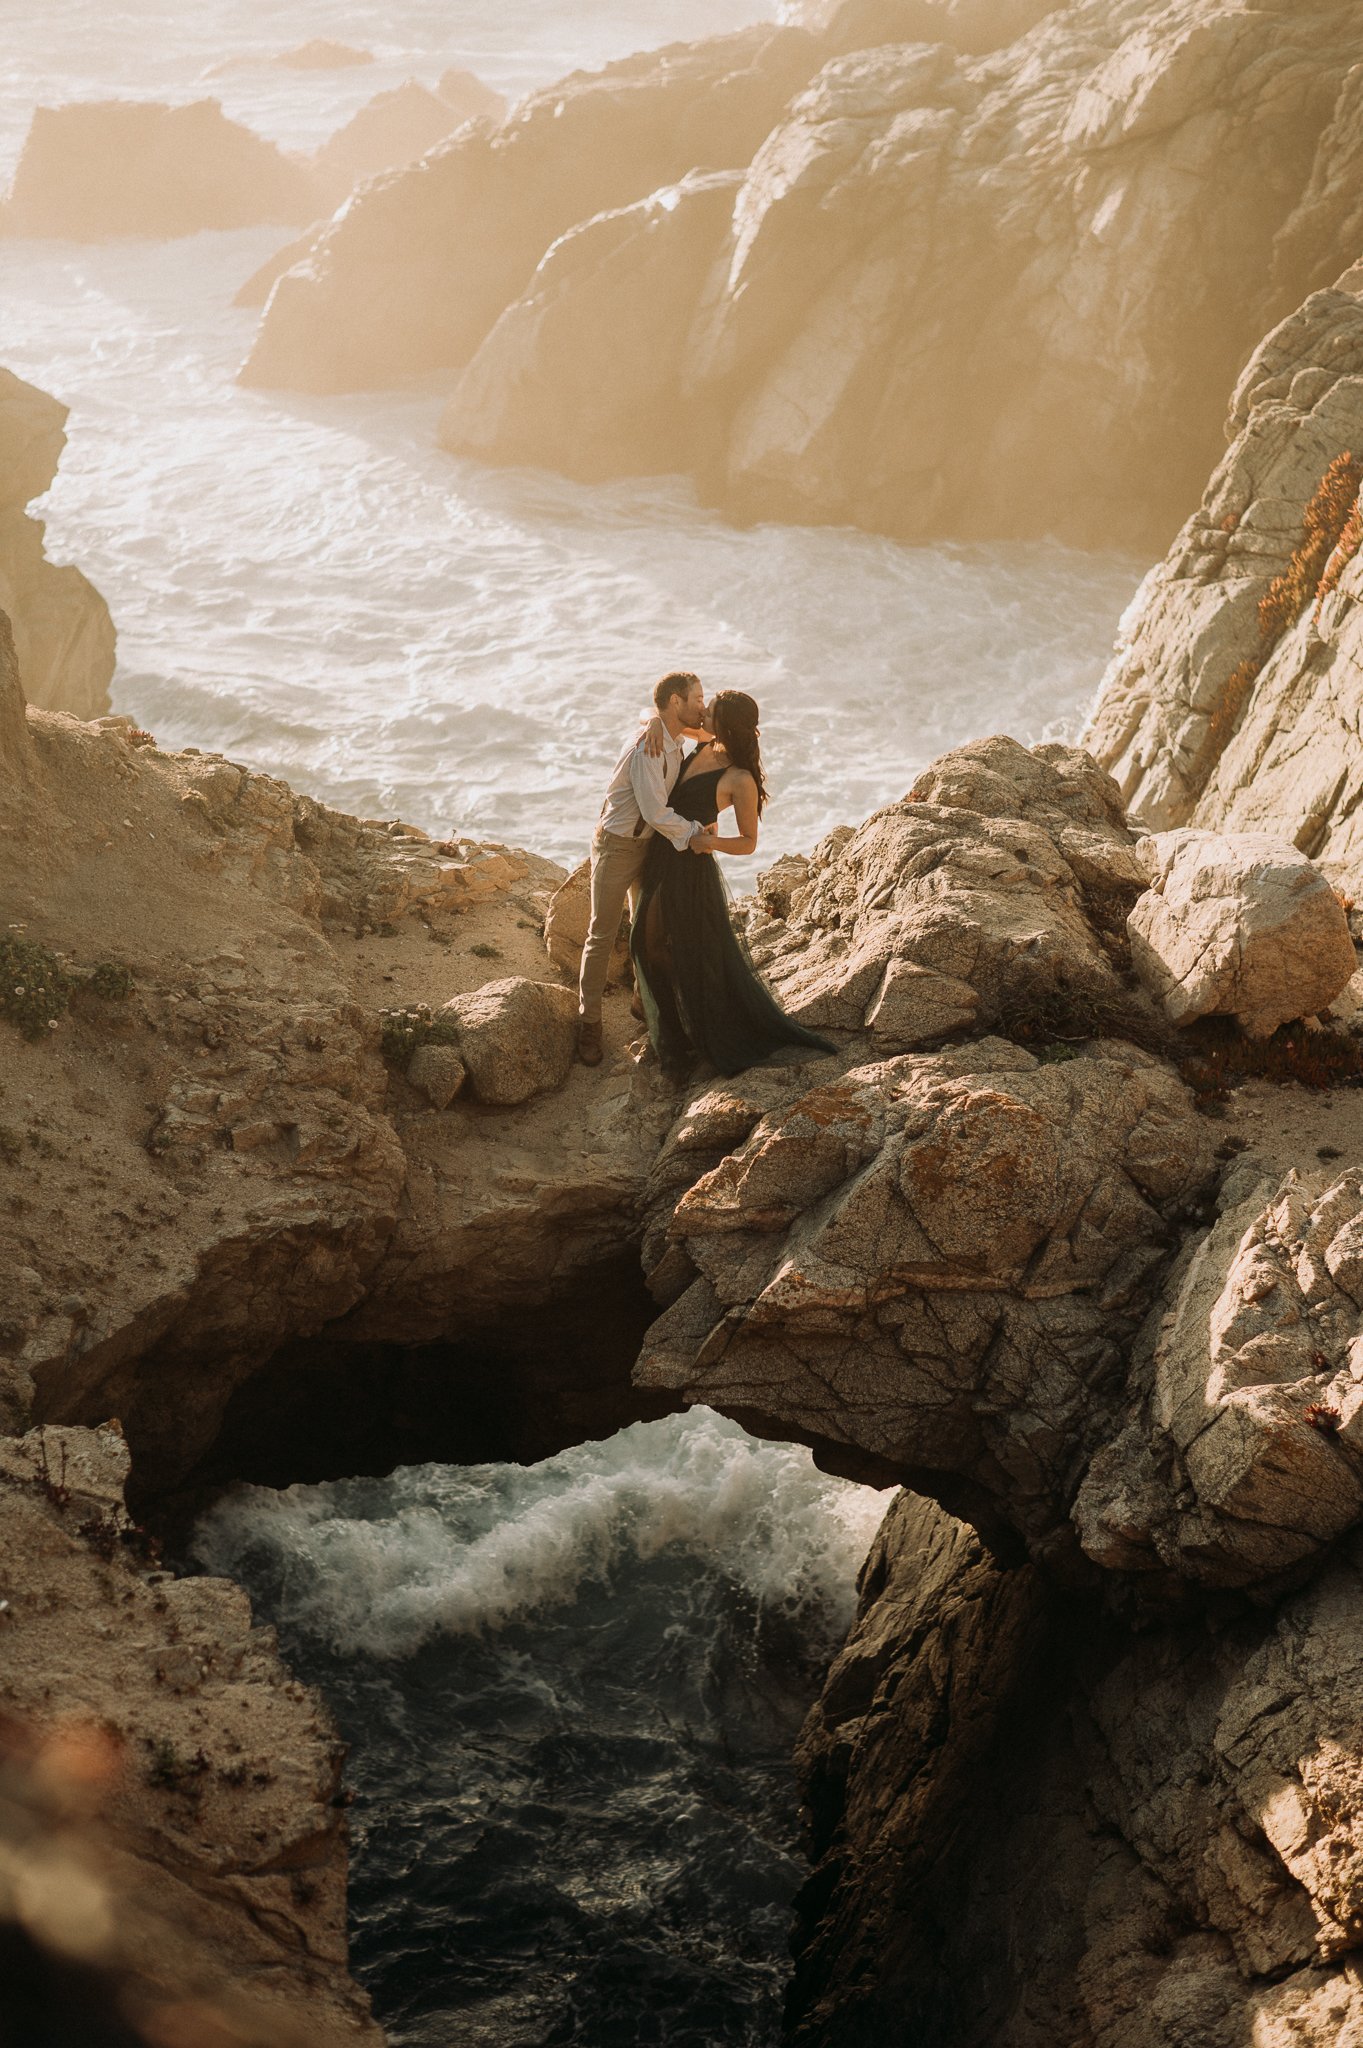 Newly engaged couple hugging at Big Sur, California on cliffs with Pacific Ocean waves behind them